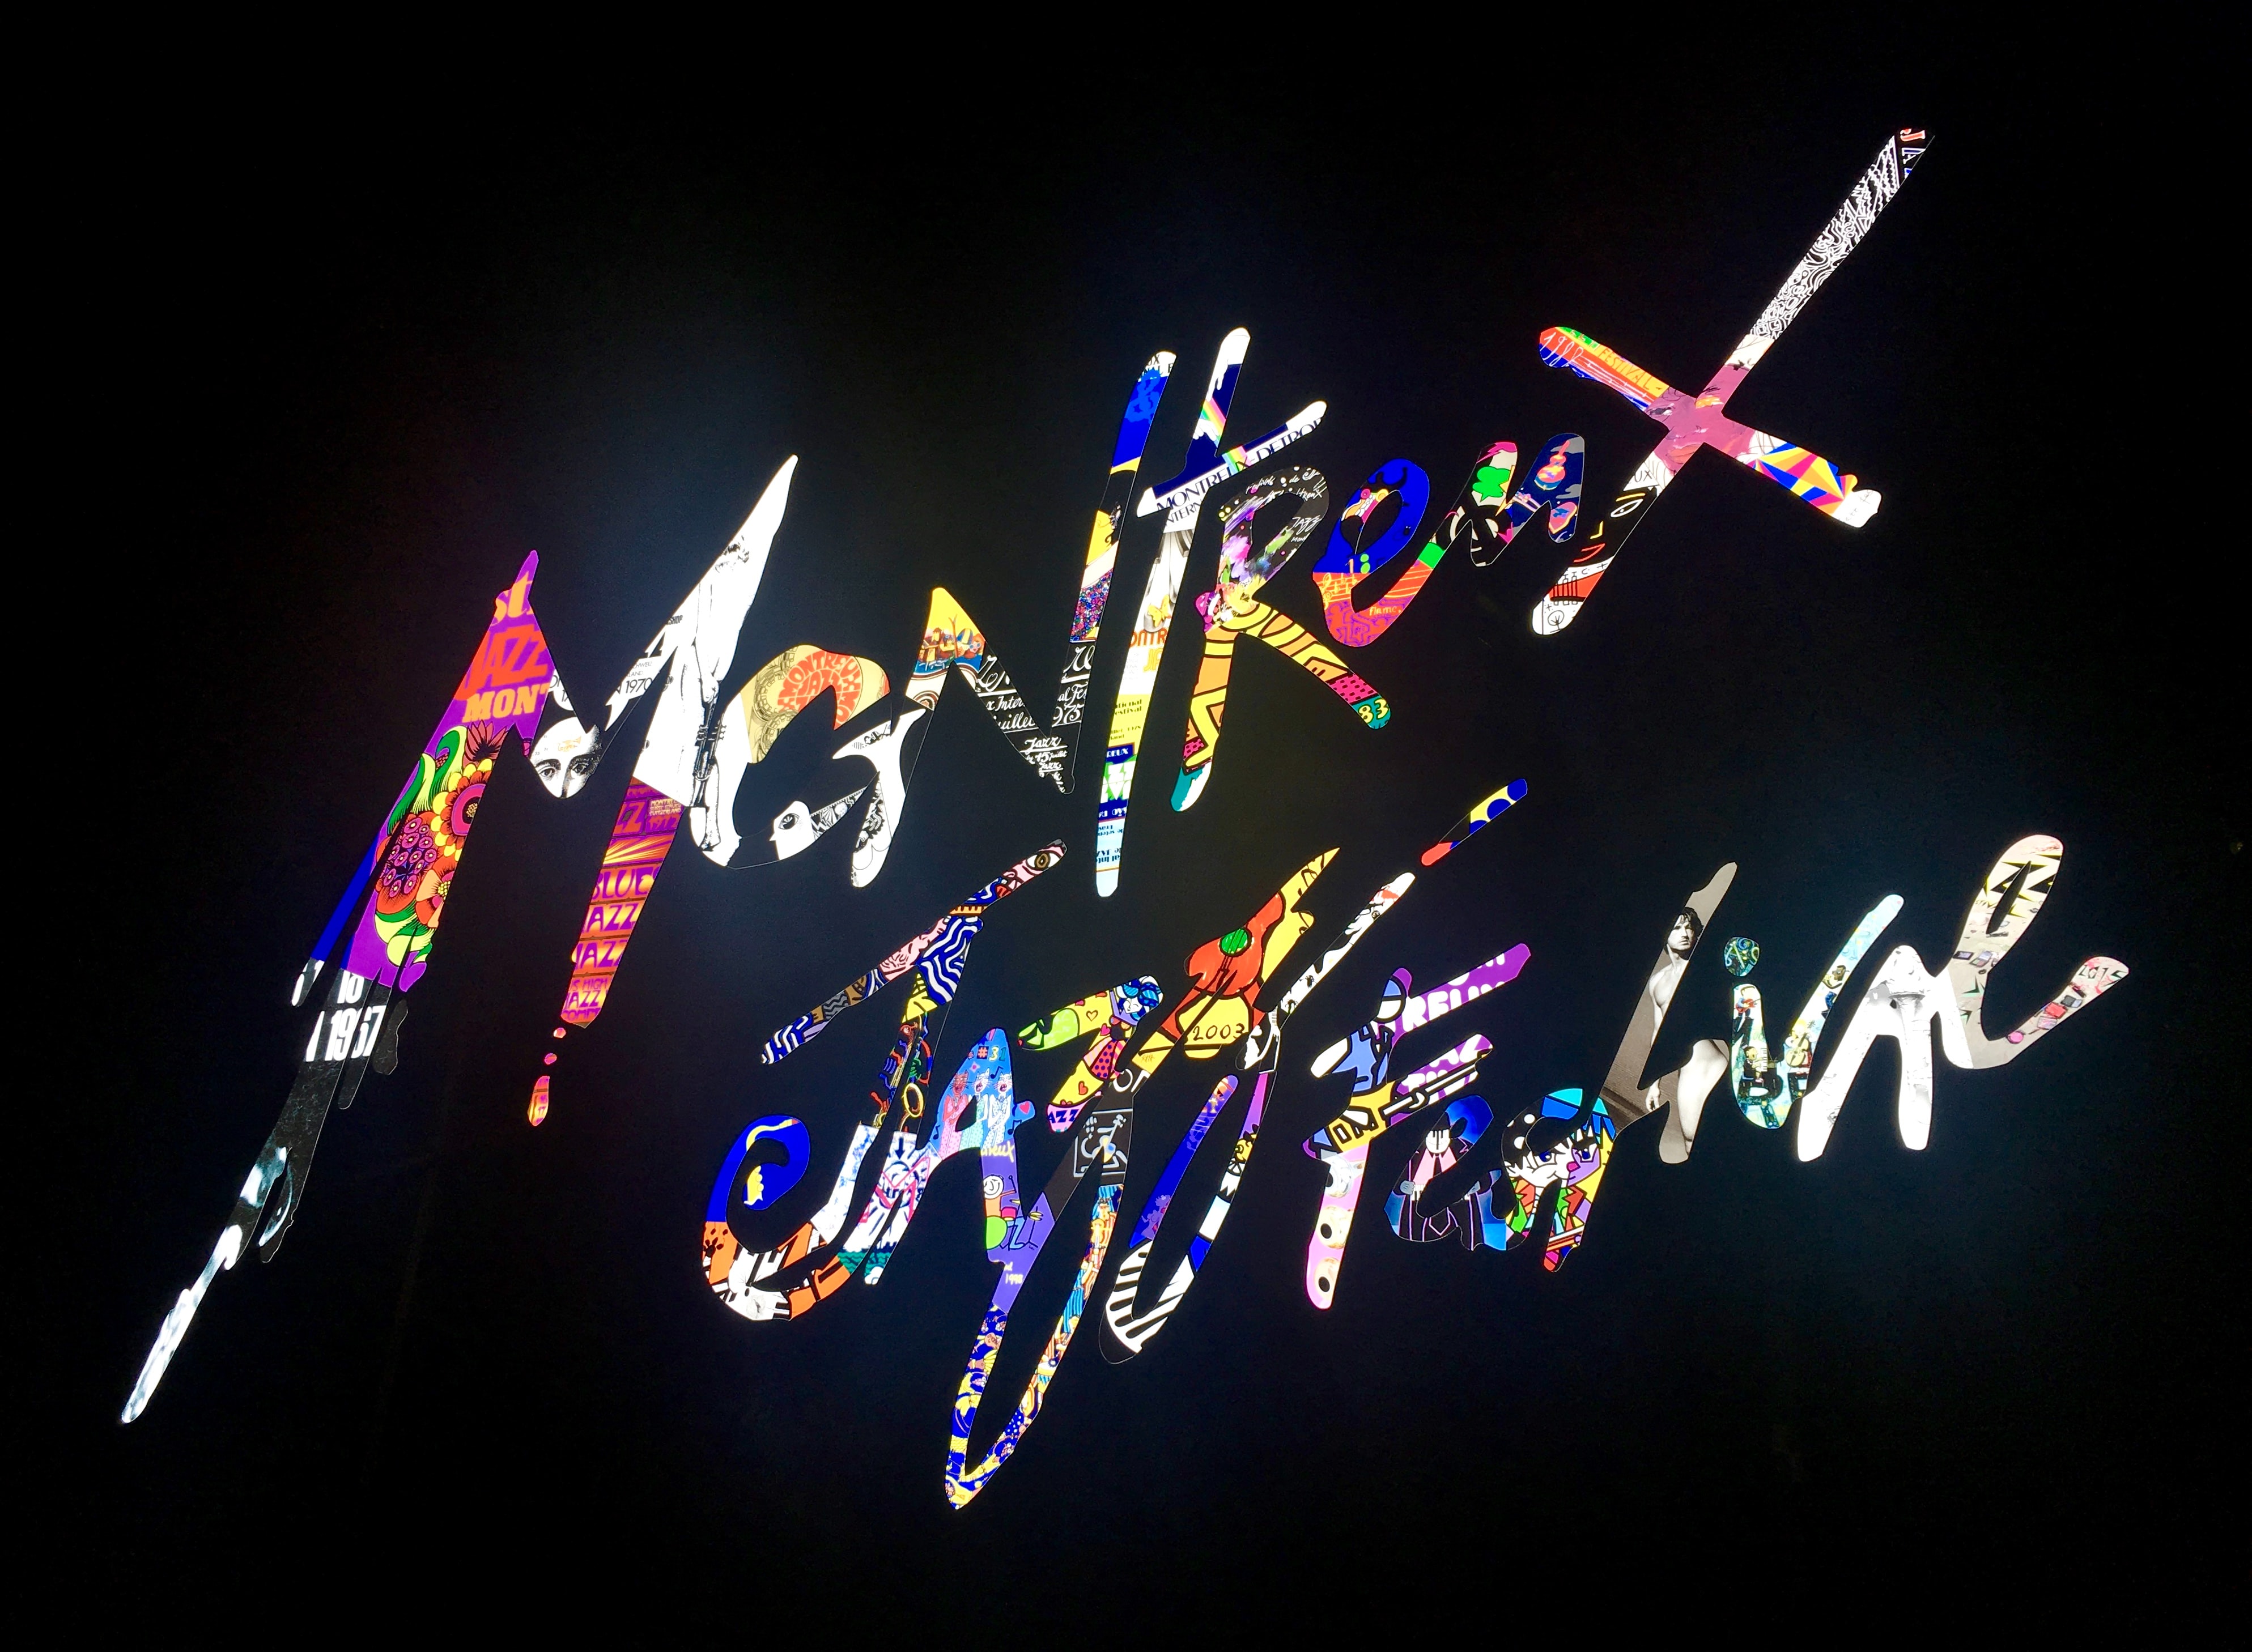 Montreux Jazz Festival in Switzerland - A truly iconic musical gathering